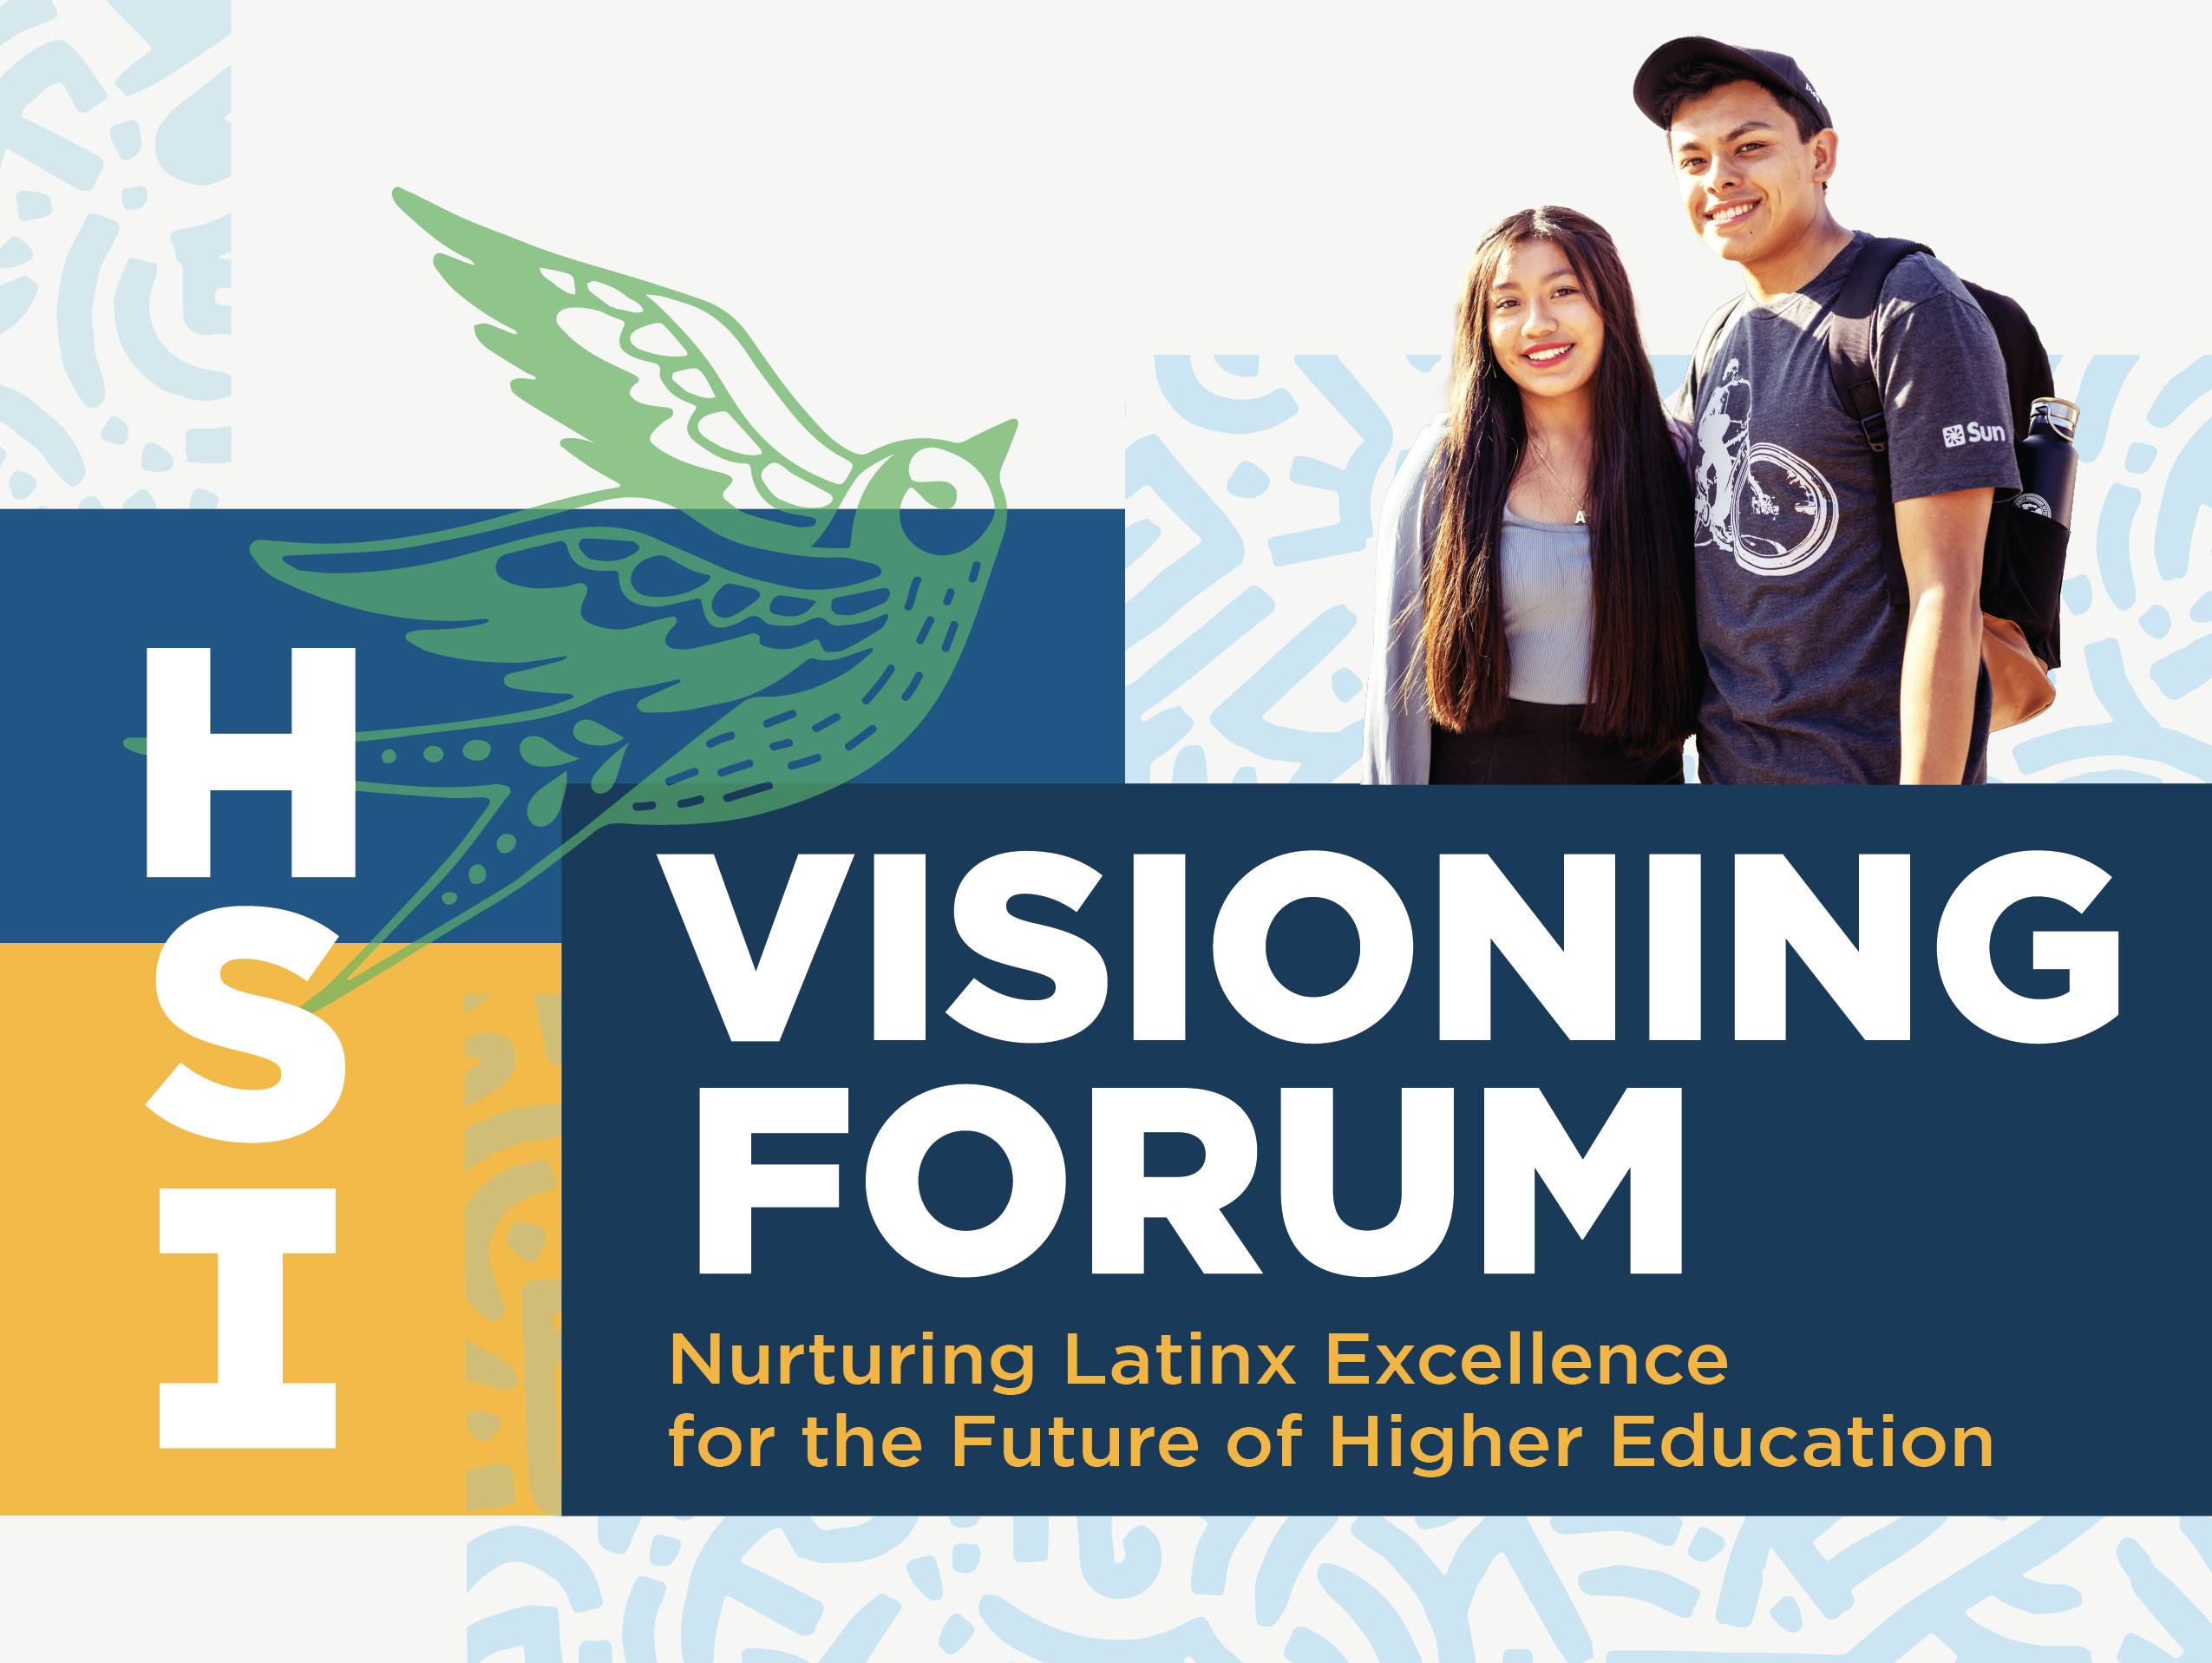 HSI Visioning Forum: Nurturing Latinx Excellence for the Future of Higher Education